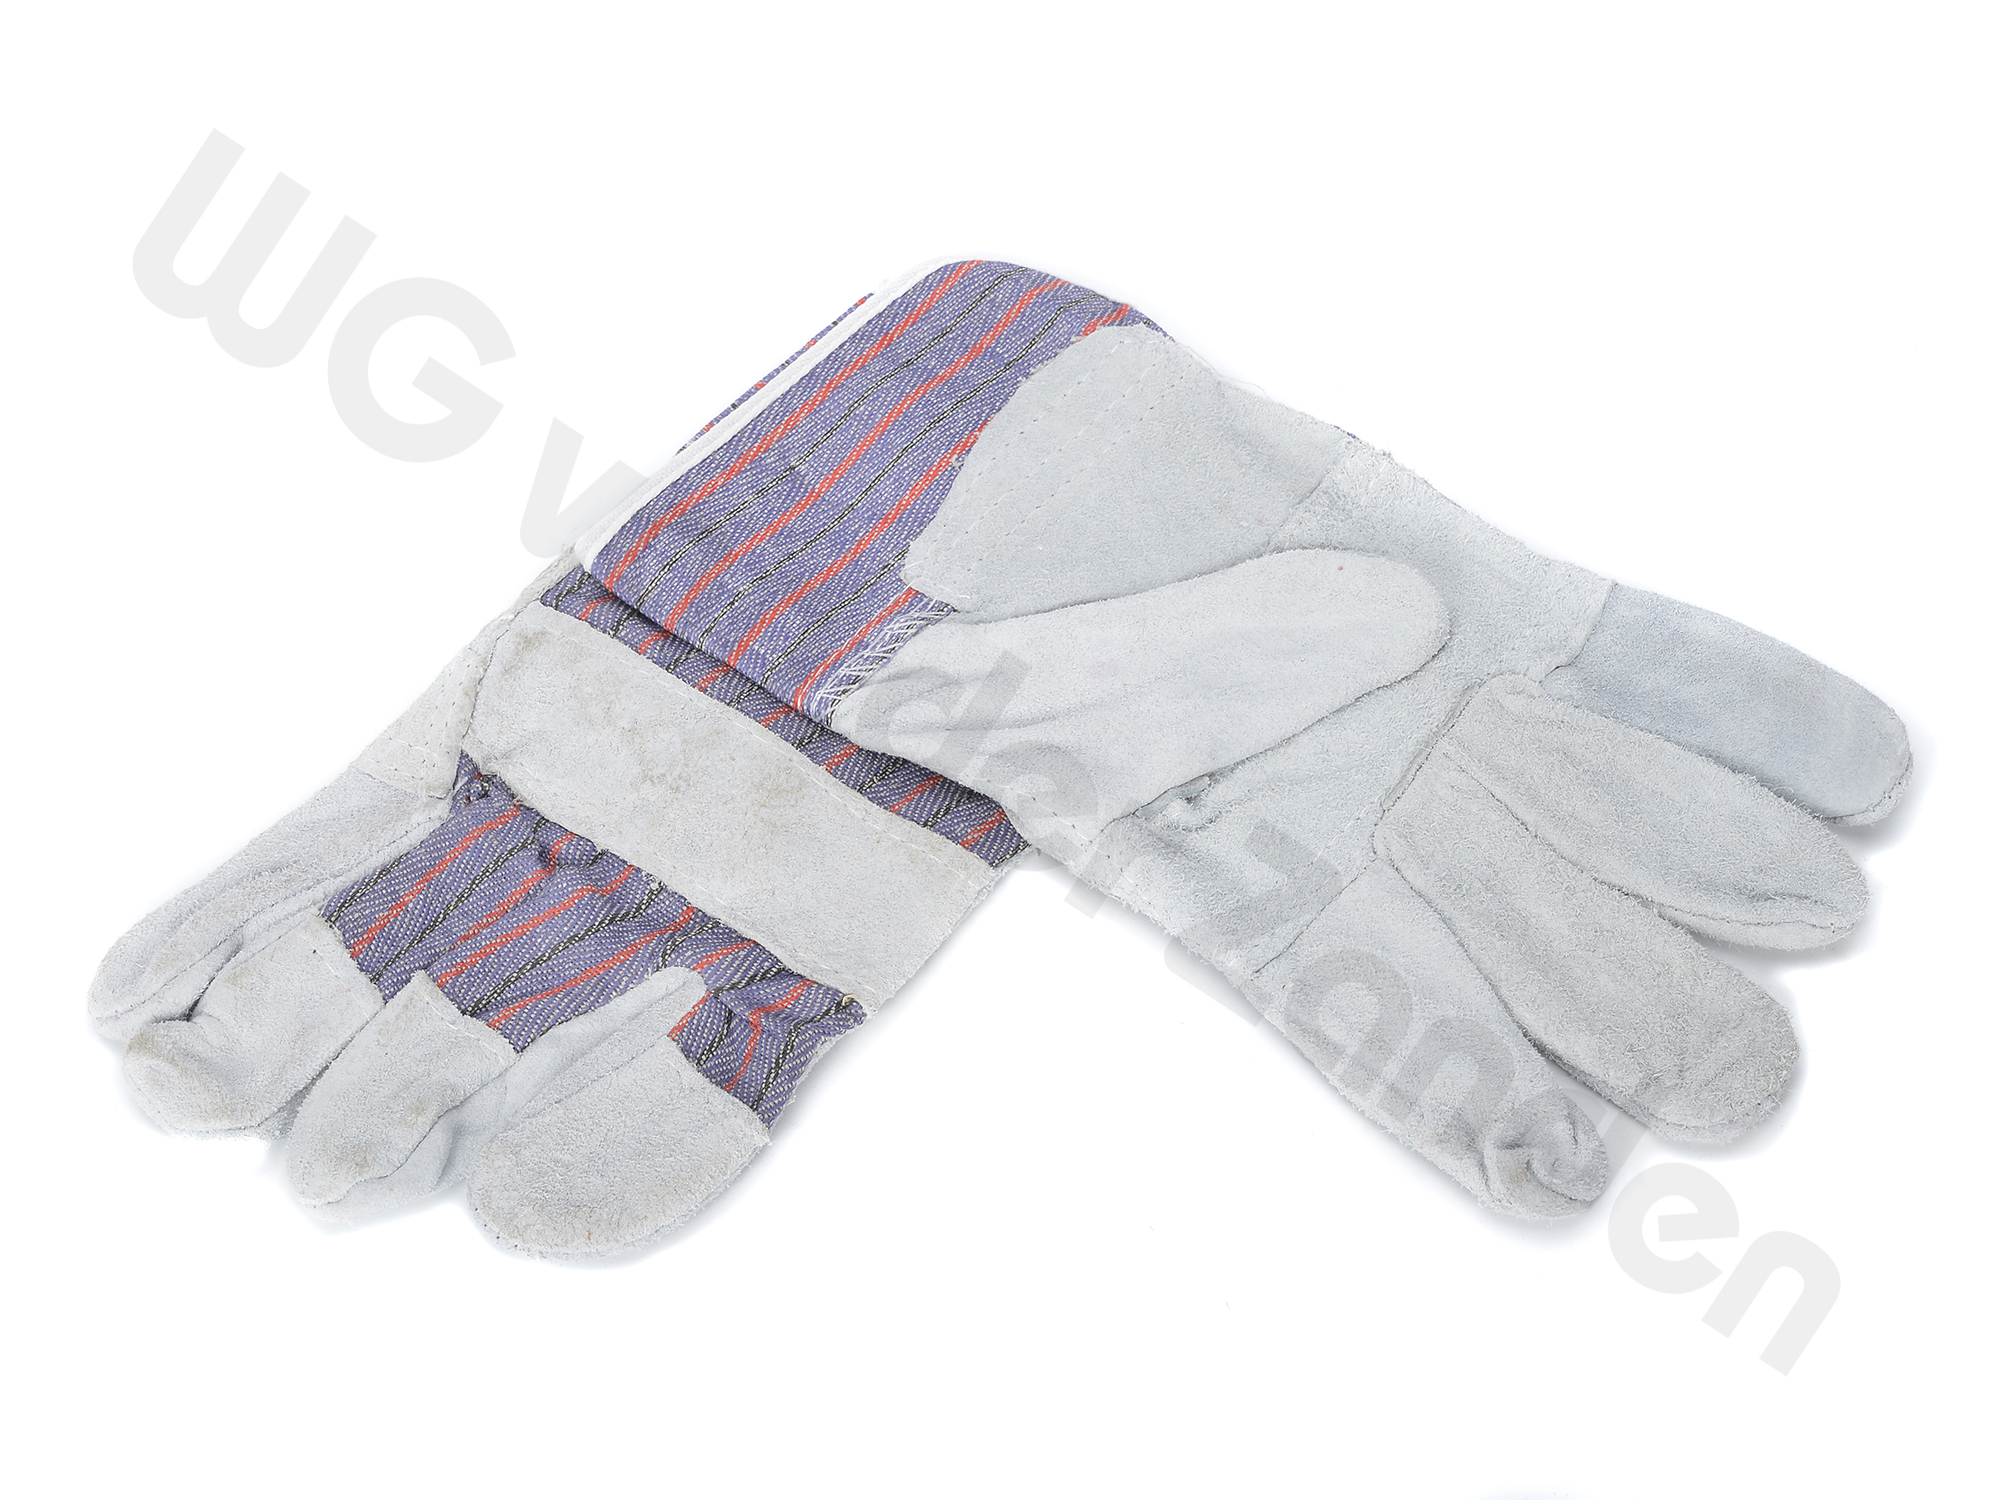 880010 GLOVES WORKING LEATHER PALM